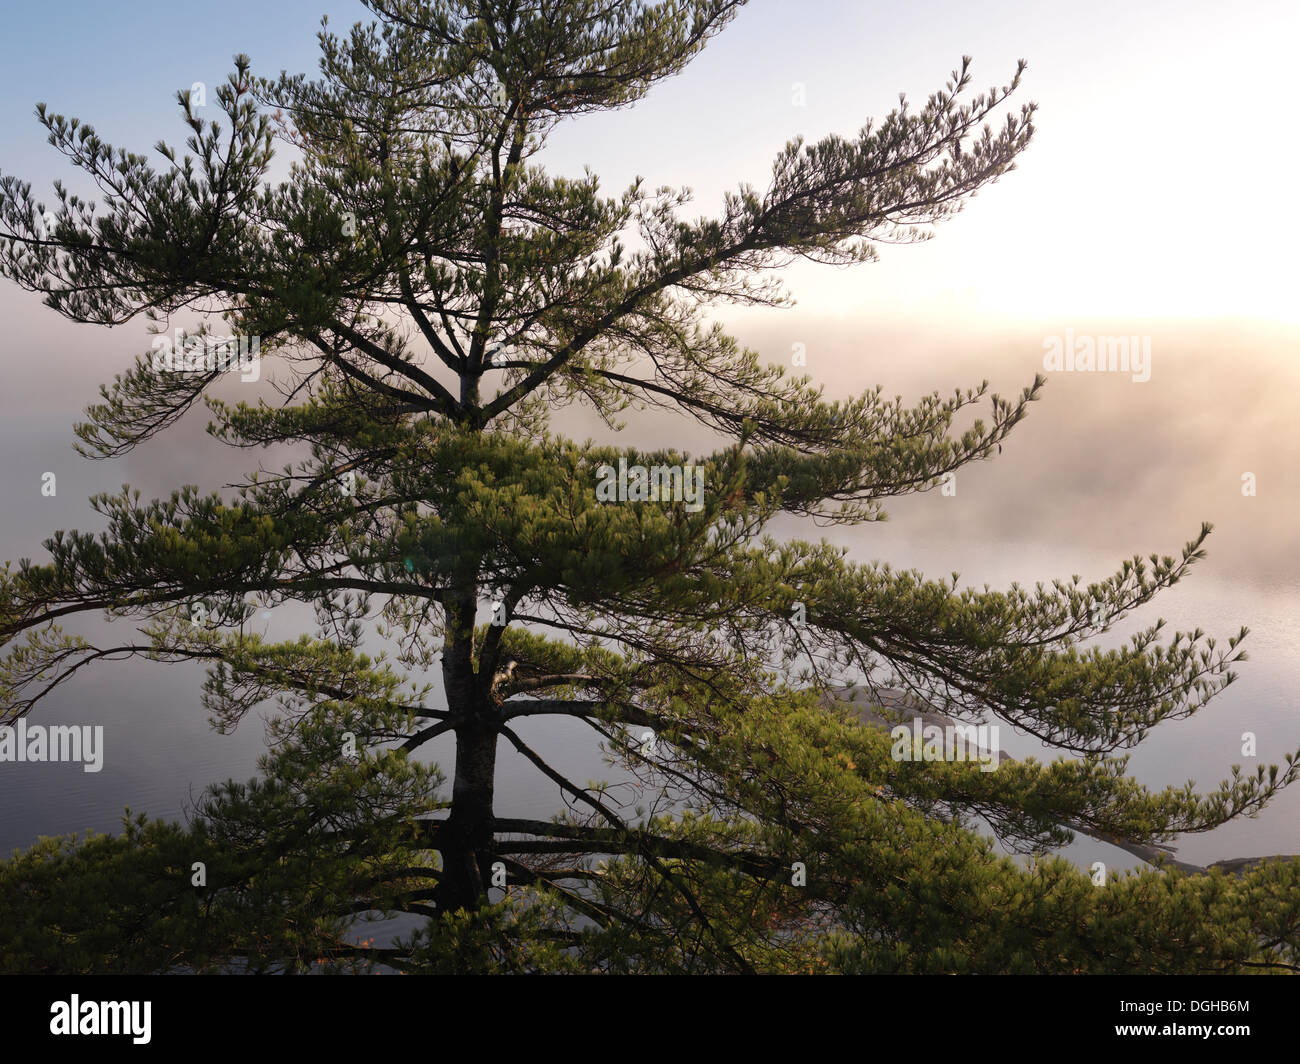 Sunrise nature scenery of an old pitch pine tree on a shore of mist covered lake George. Killarney Provincial Park, Ontario Stock Photo